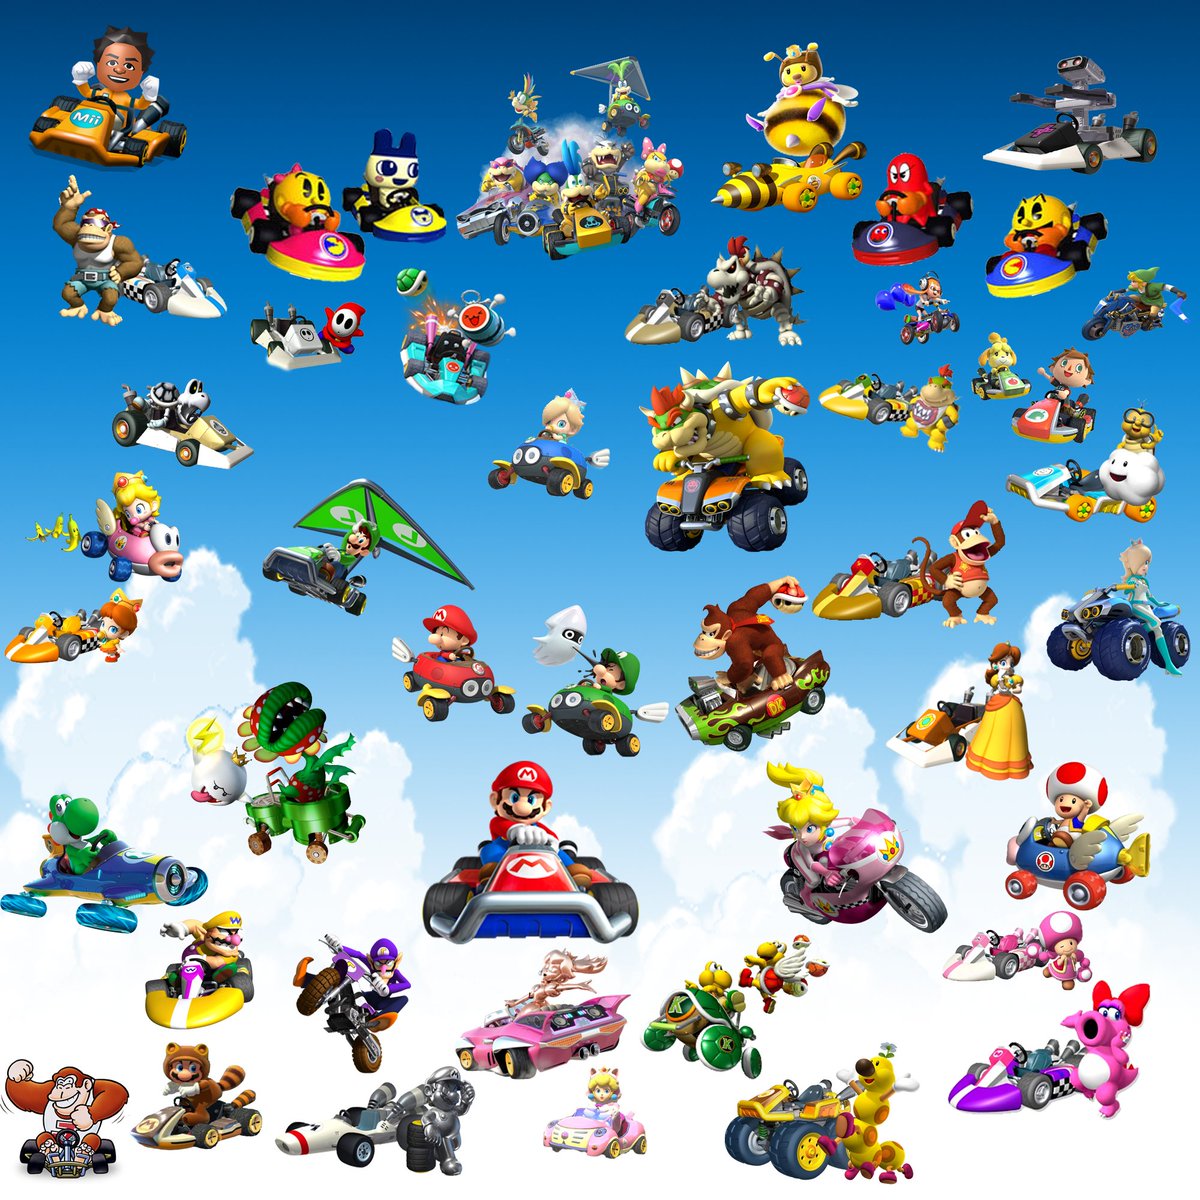 You never forget your first. A thread.(QRT your answer)What was your FIRST Mario Kart game?